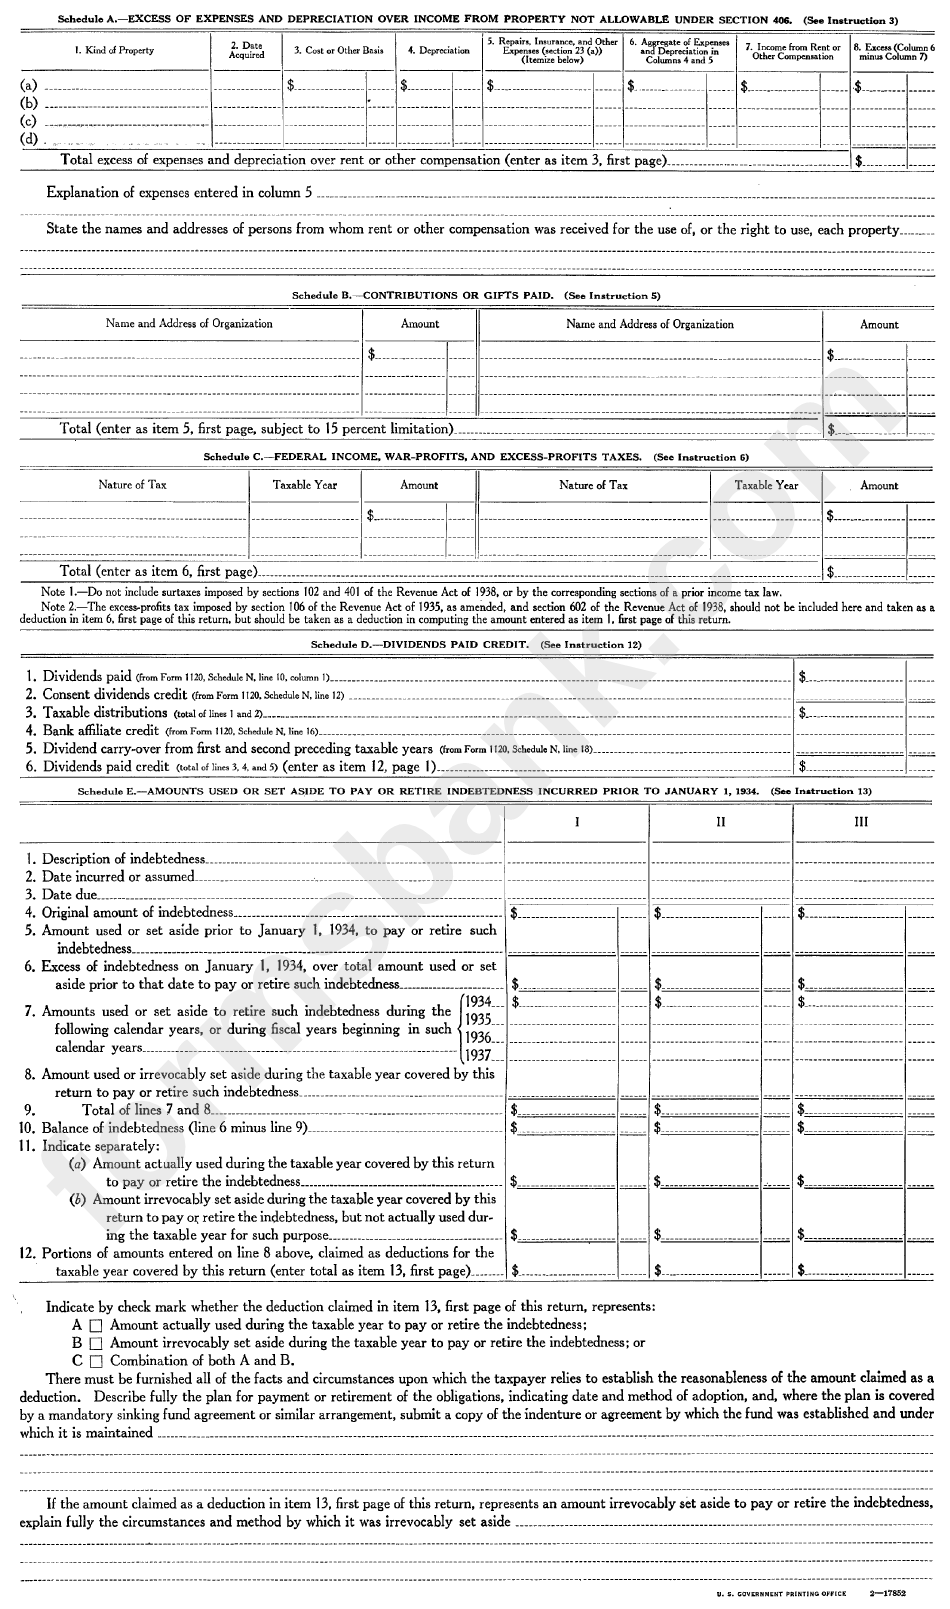 Form 1120 H - Return Of Personal Holding Company - 1938